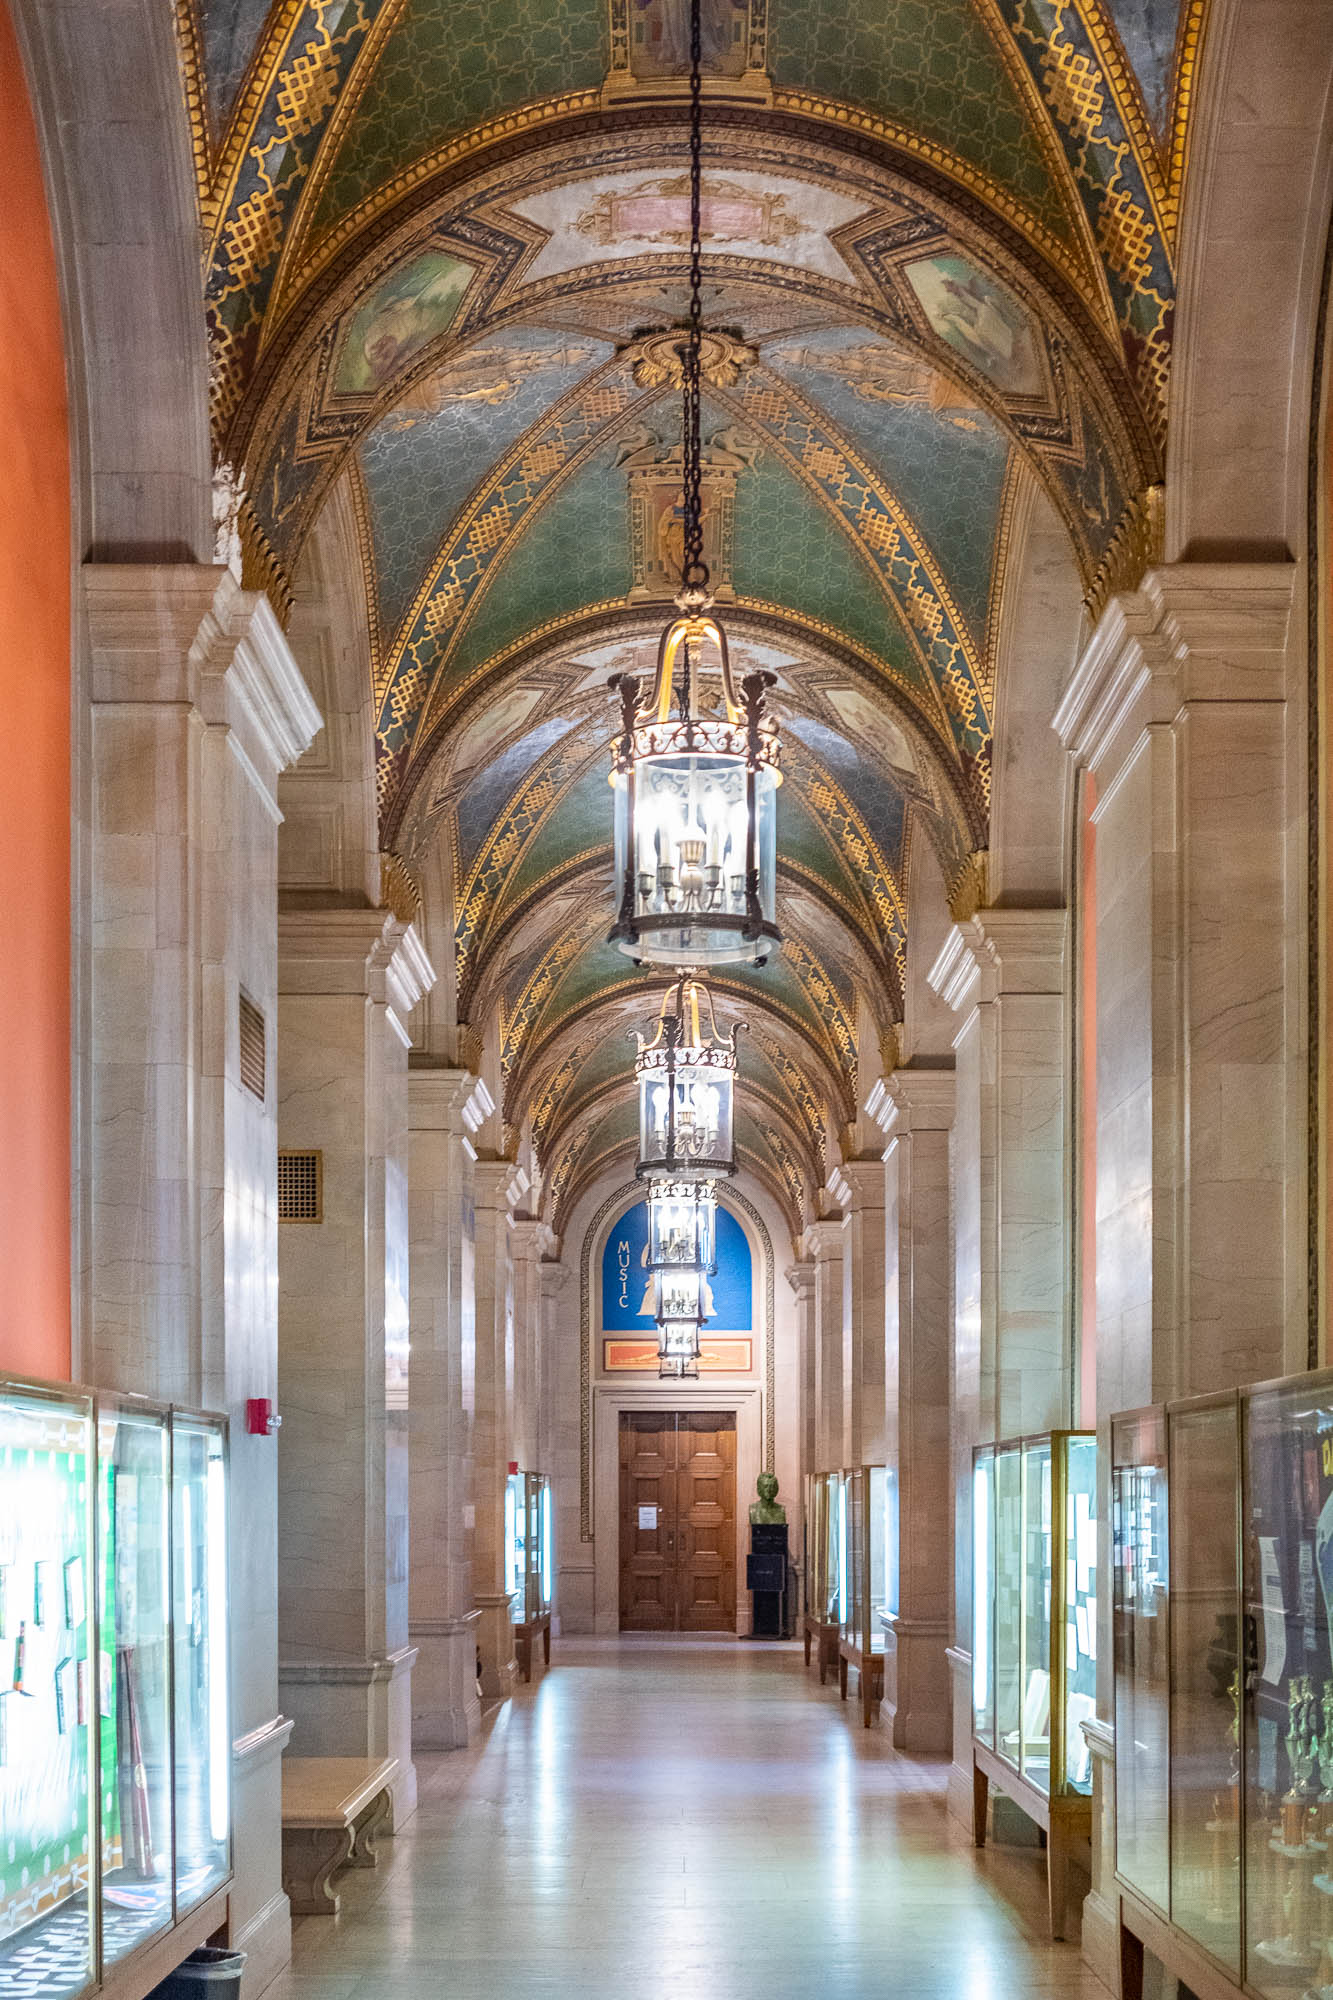 Interior of a richly decorated Beaux-Arts library corridor, with gilded and coloured vaulted ceilings and cylindrical chandeliers.